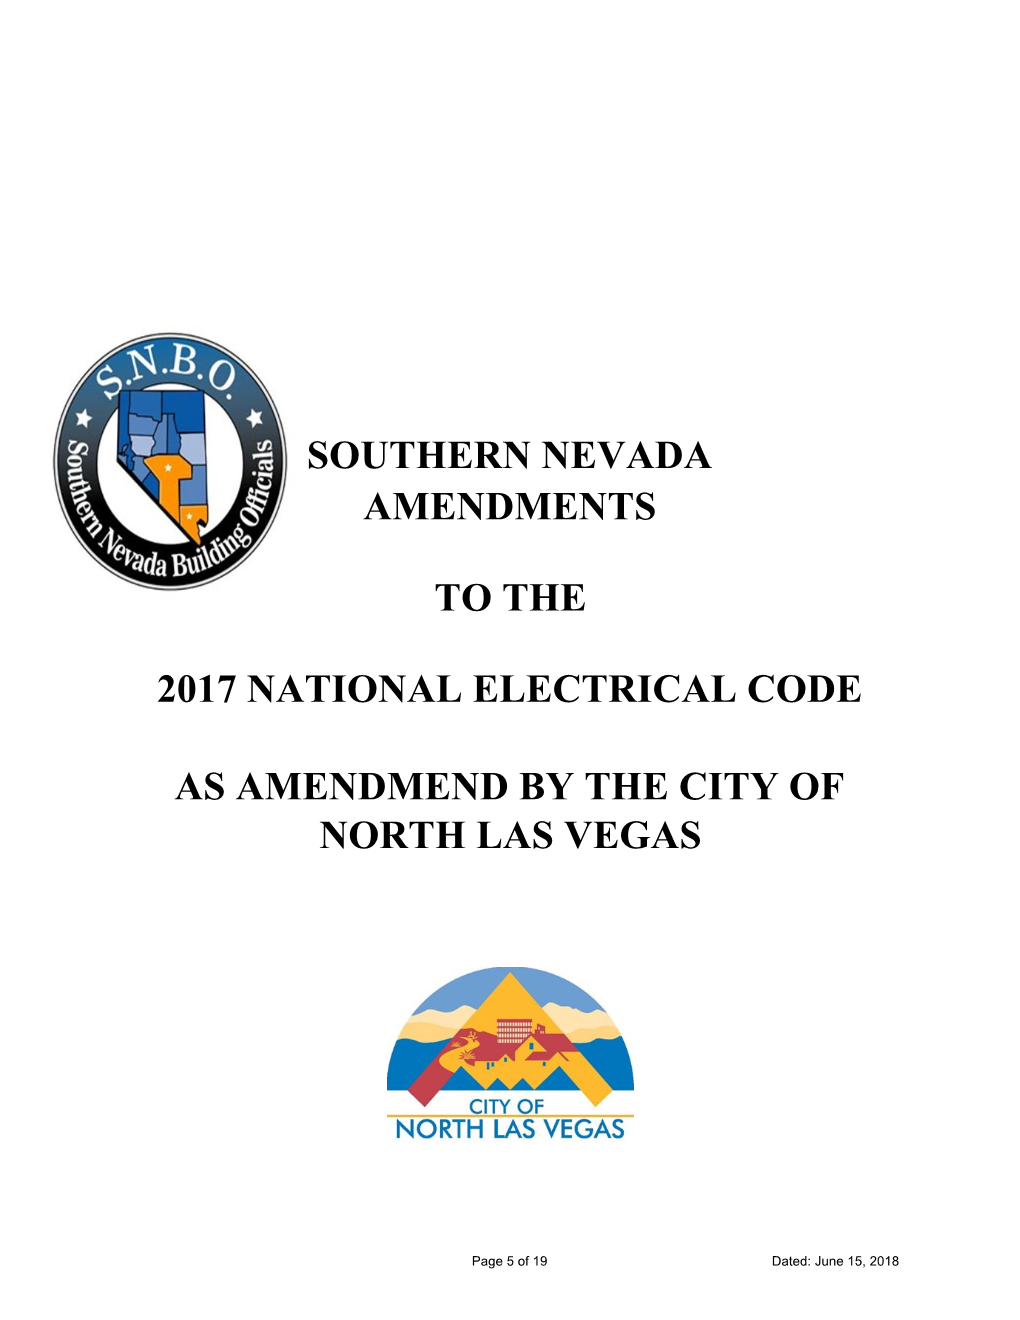 Southern Nevada Amendments to the 2017 National Electrical Code As